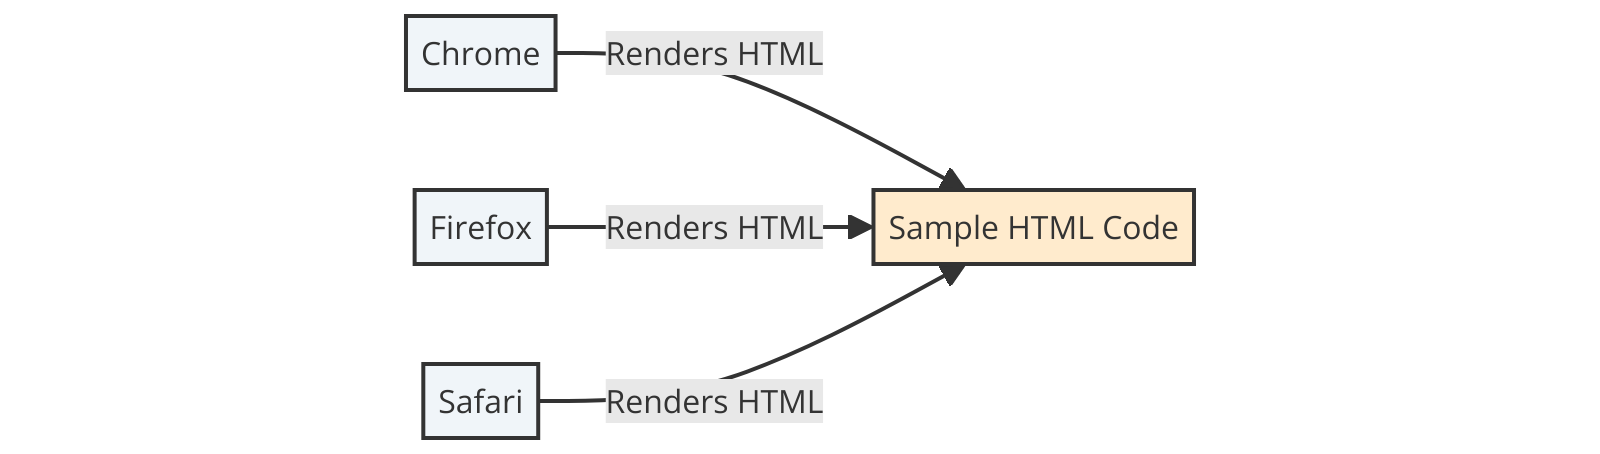 Browser Rendering: showing how a sample HTML code is rendered in different browsers (Chrome, Firefox, Safari).